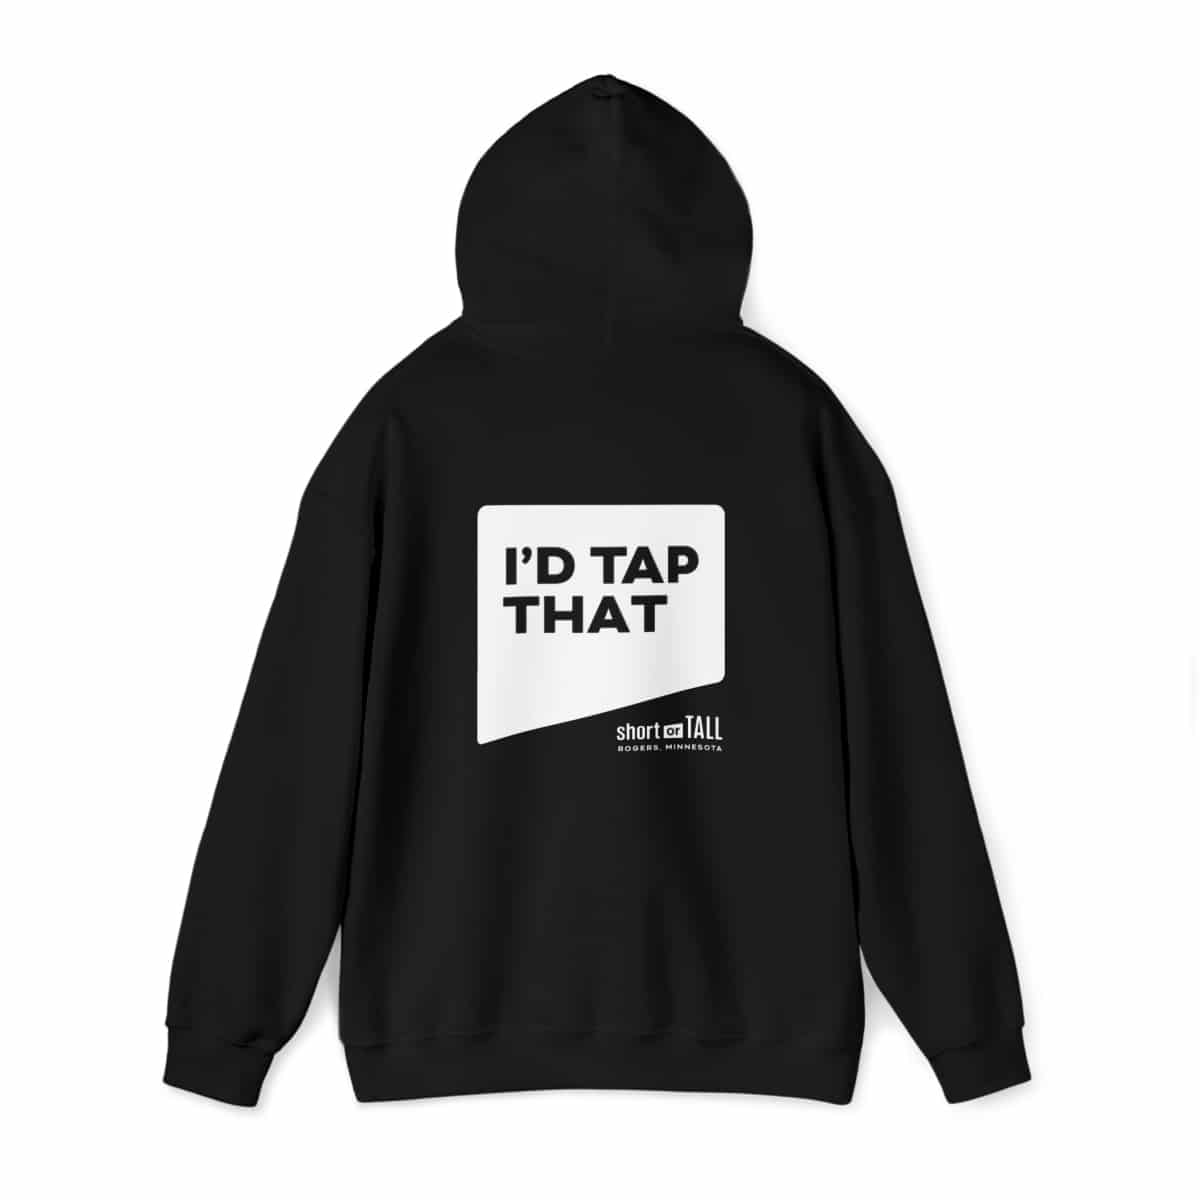 “I’d Tap That” – Unisex Hoodie